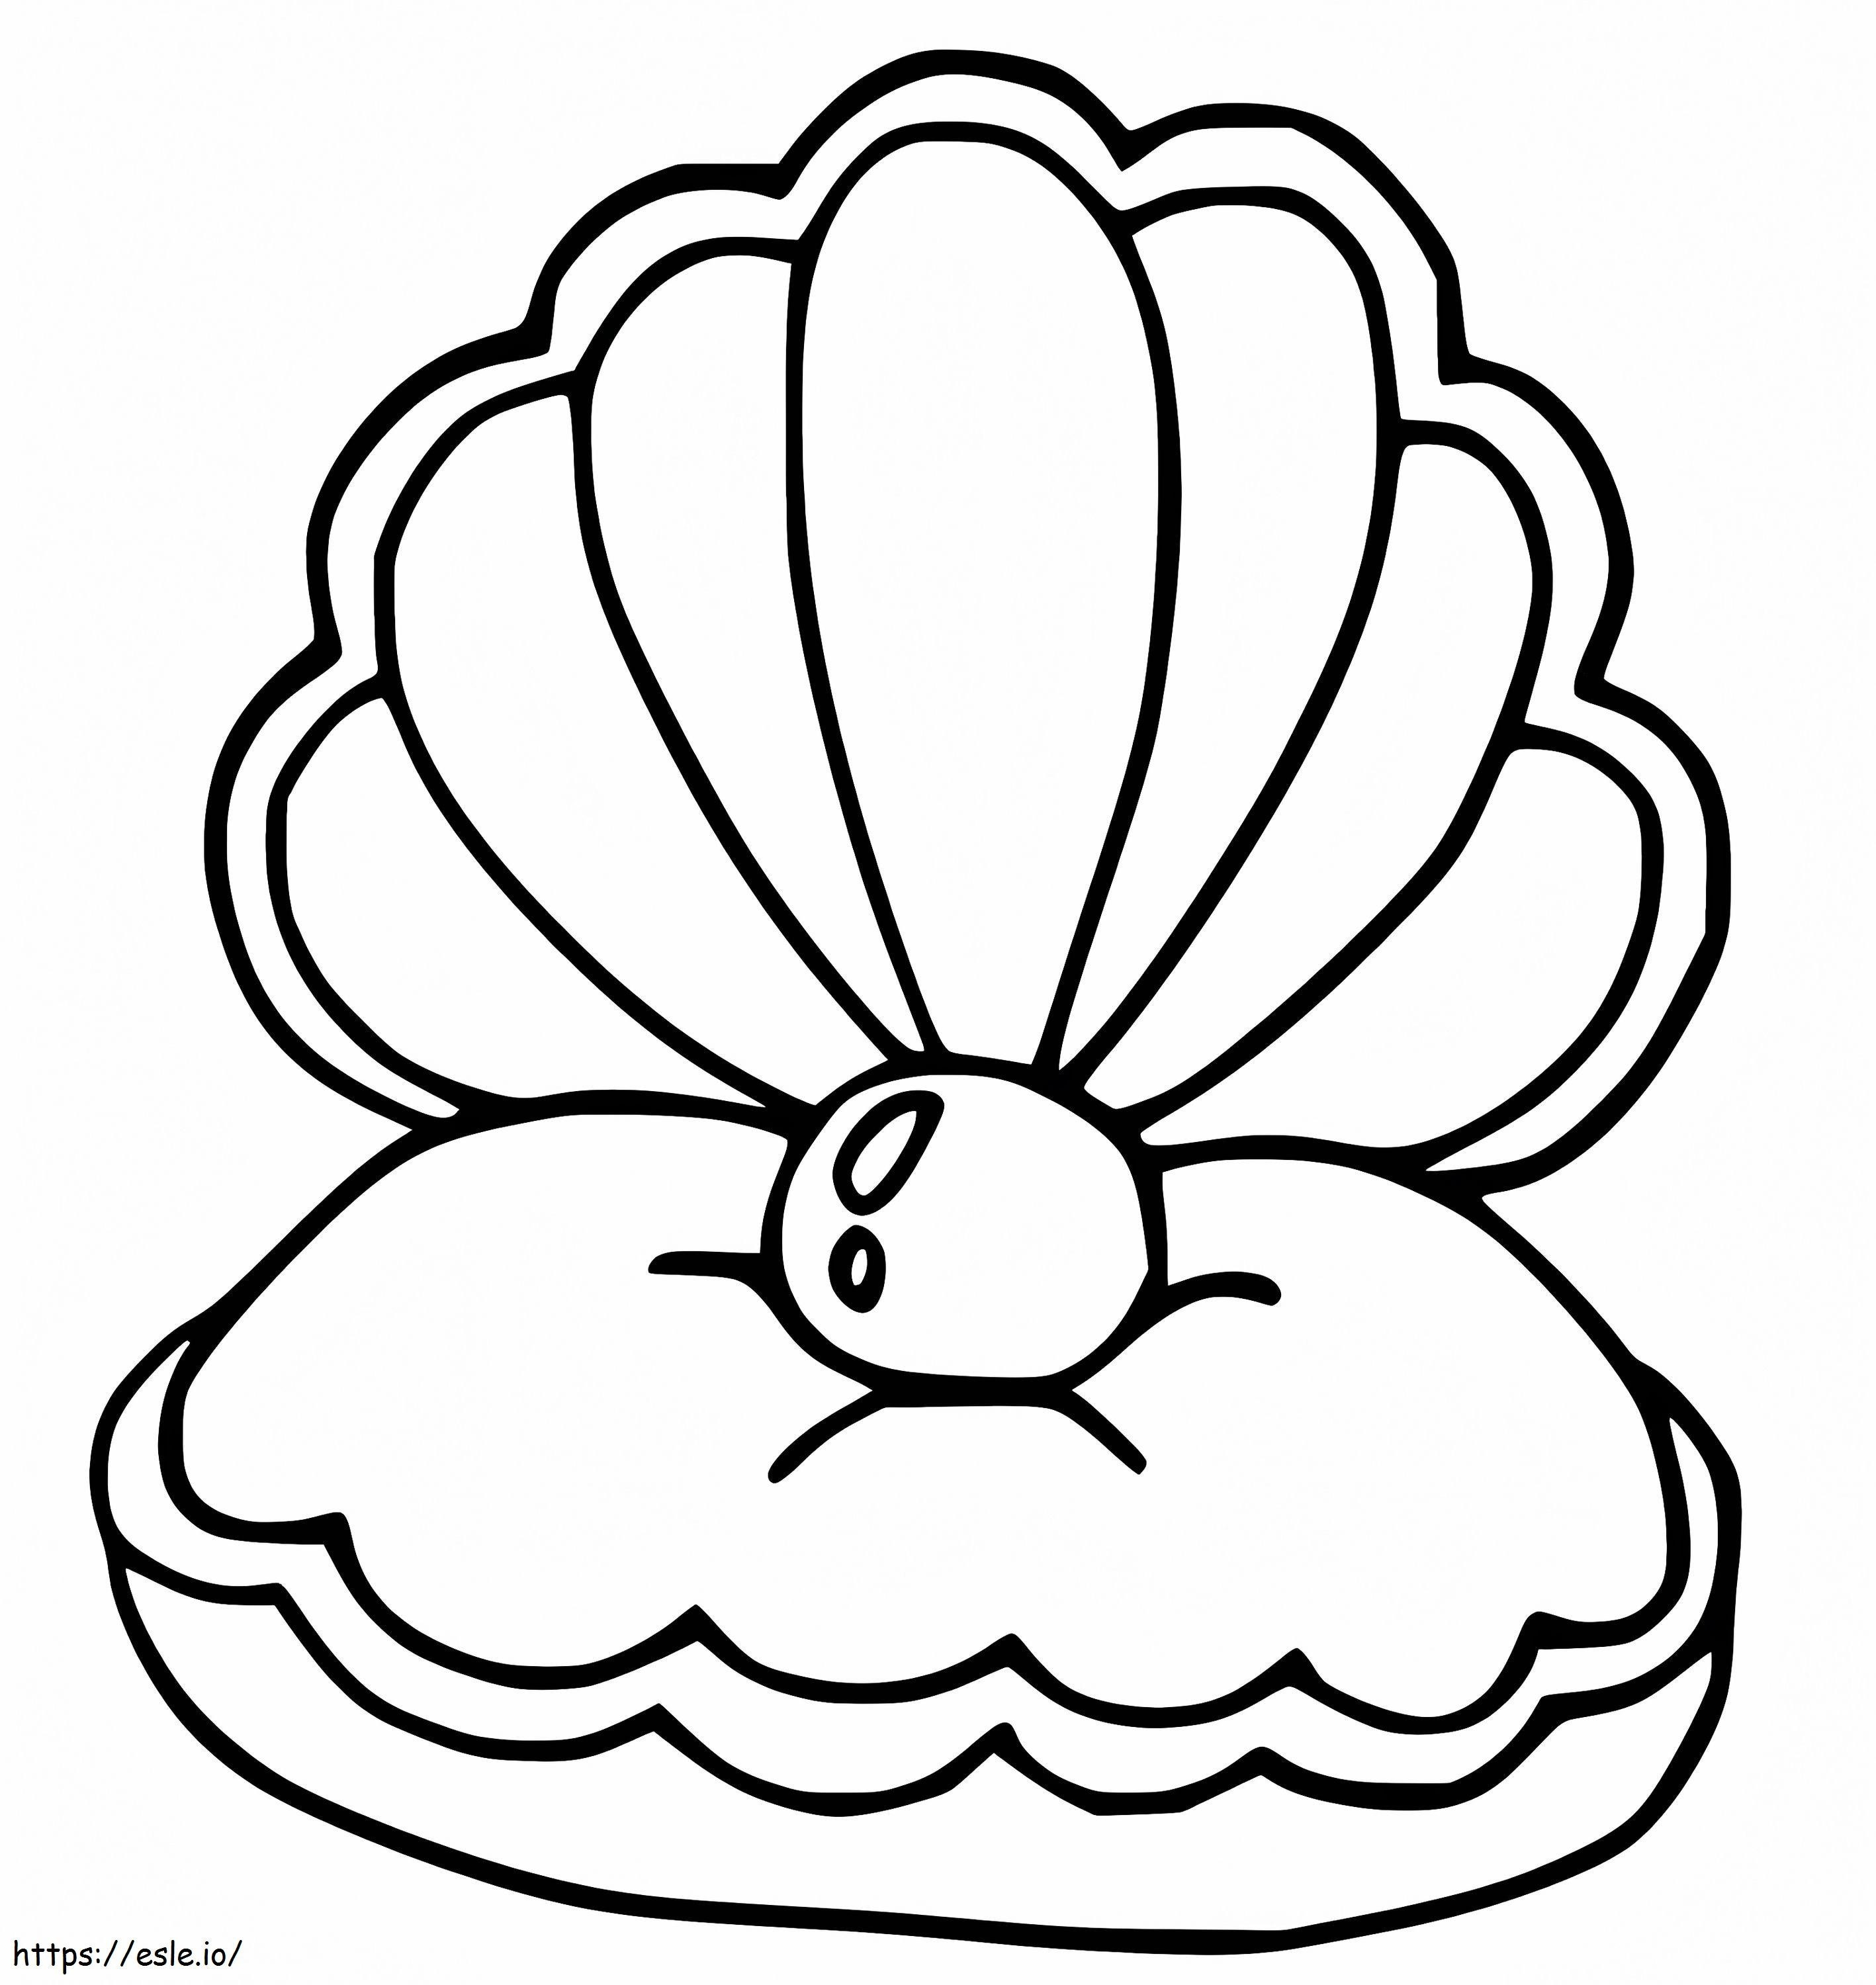 Scallop 1 coloring page